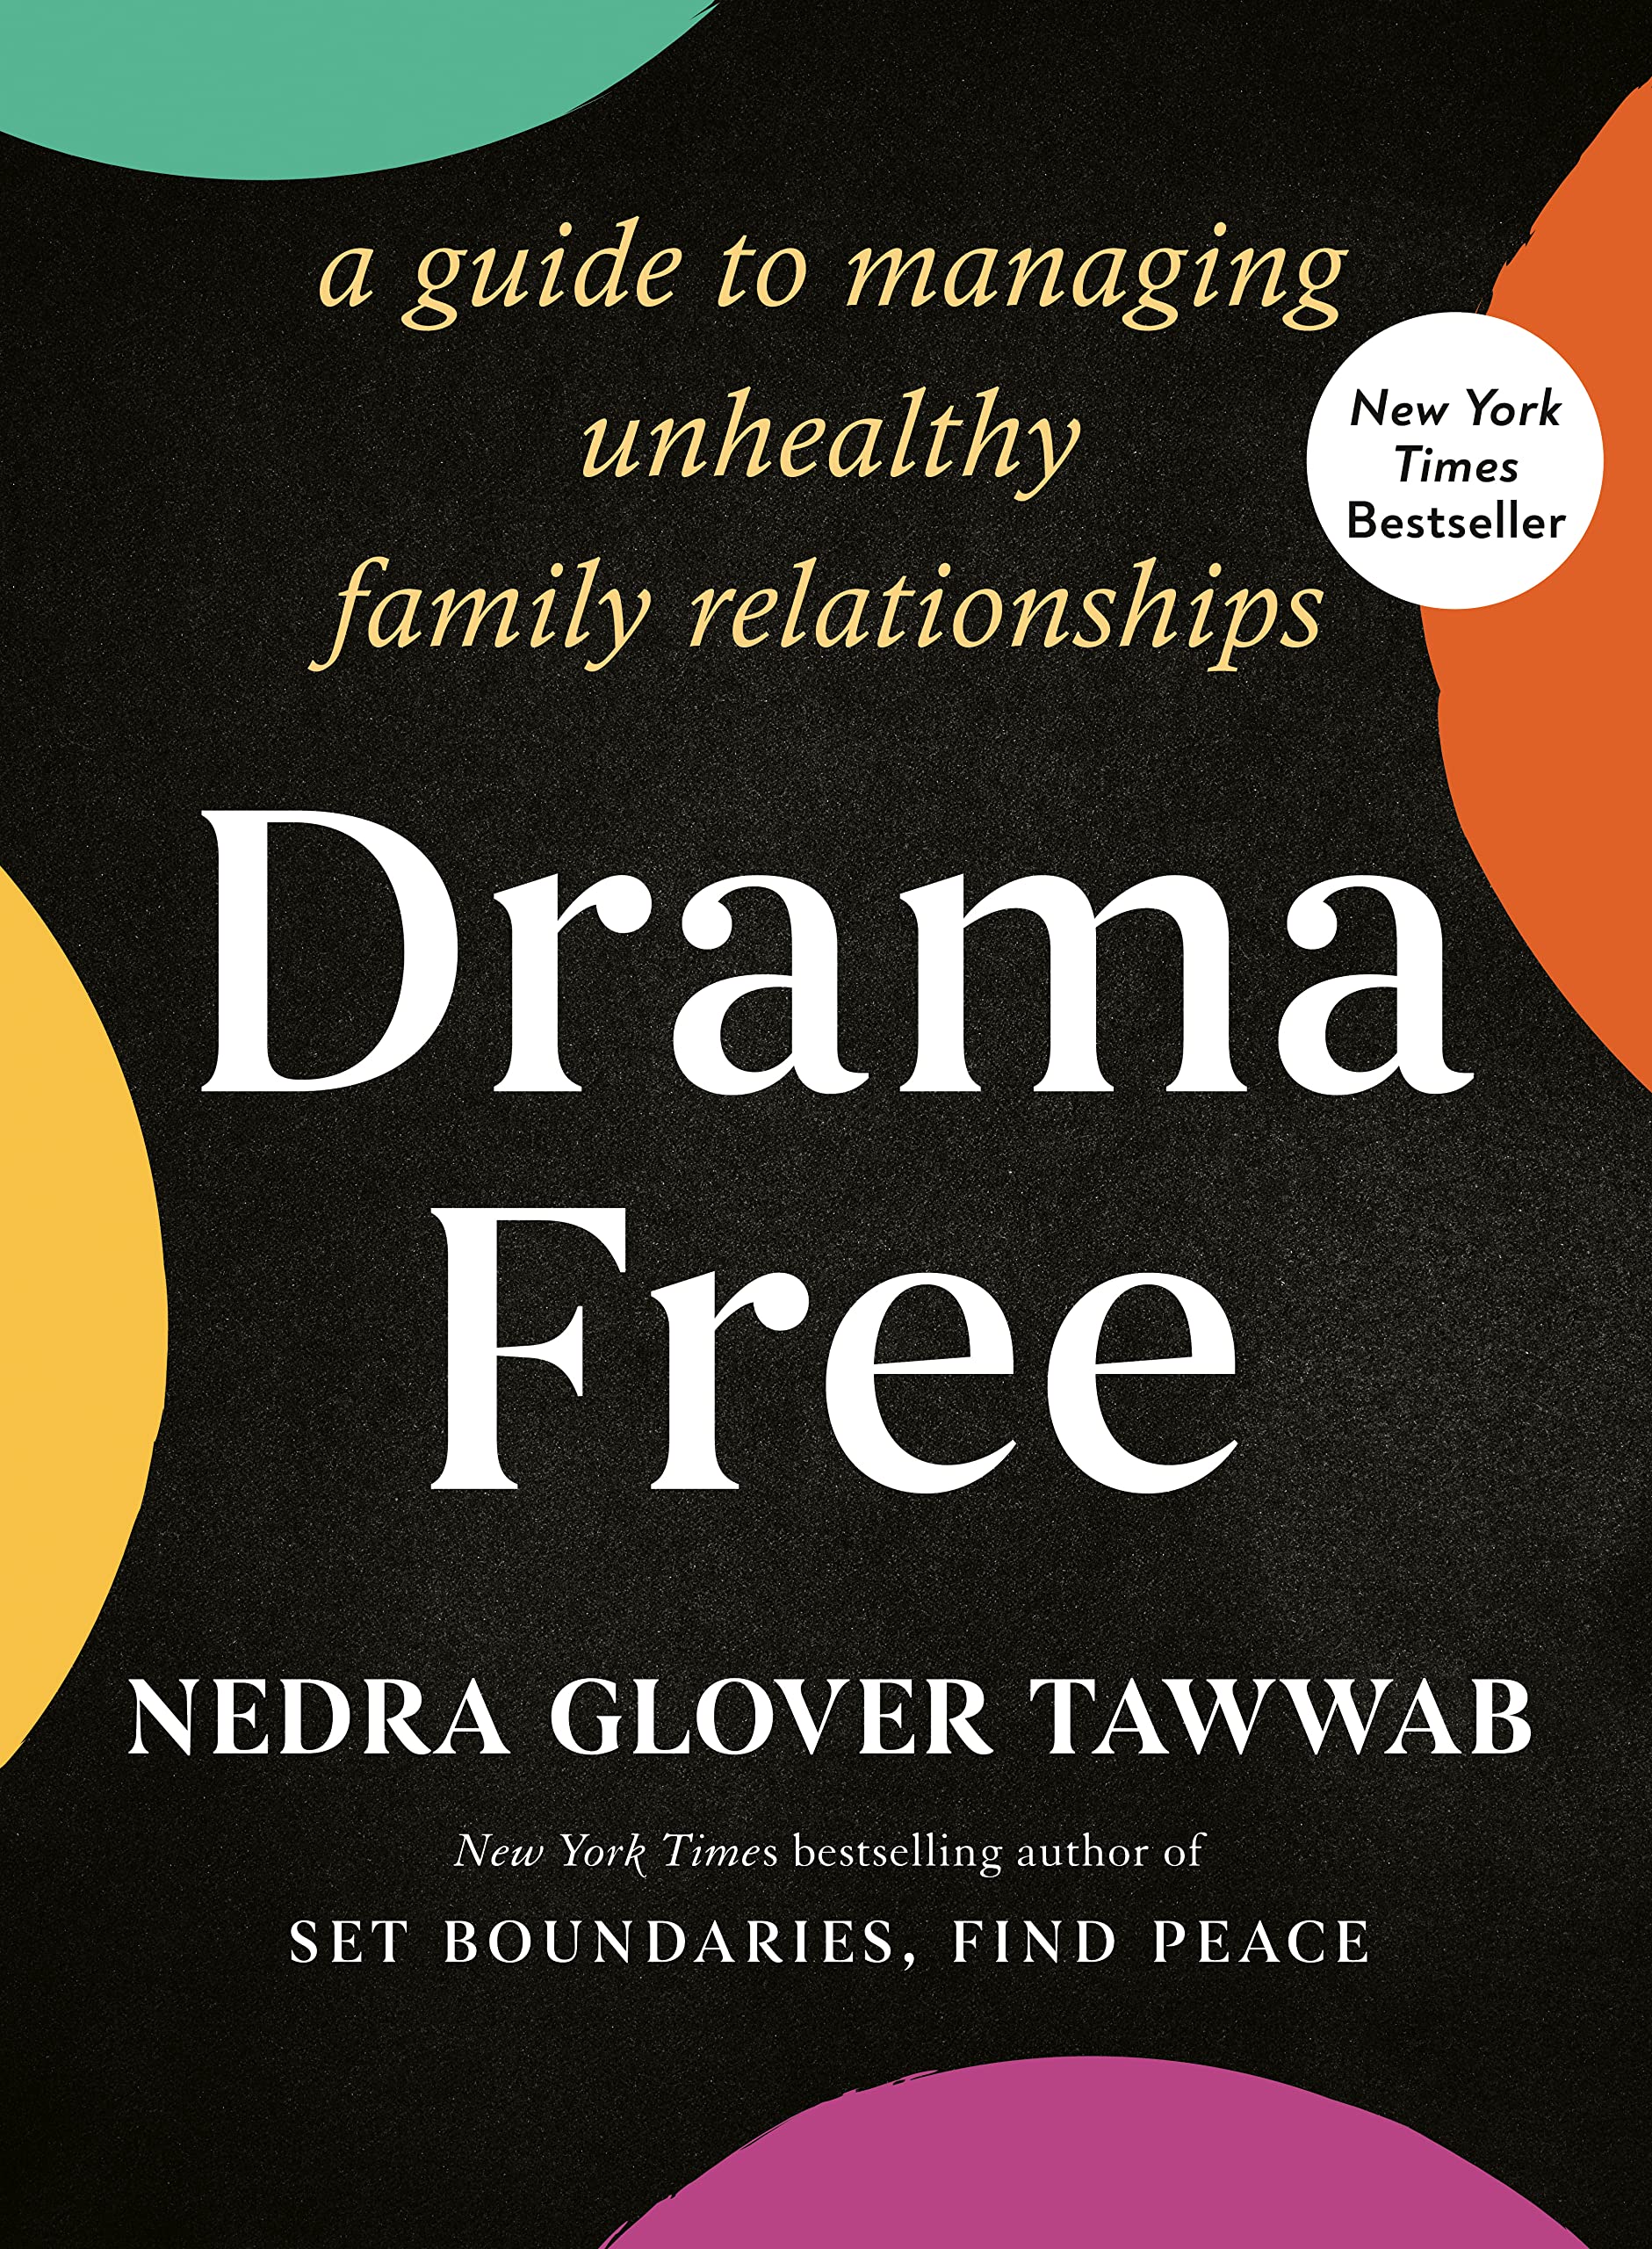 Drama Free: A Guide to Managing Unhealthy Family Relationships (eBook) by Nedra Glover Tawwab $1.99